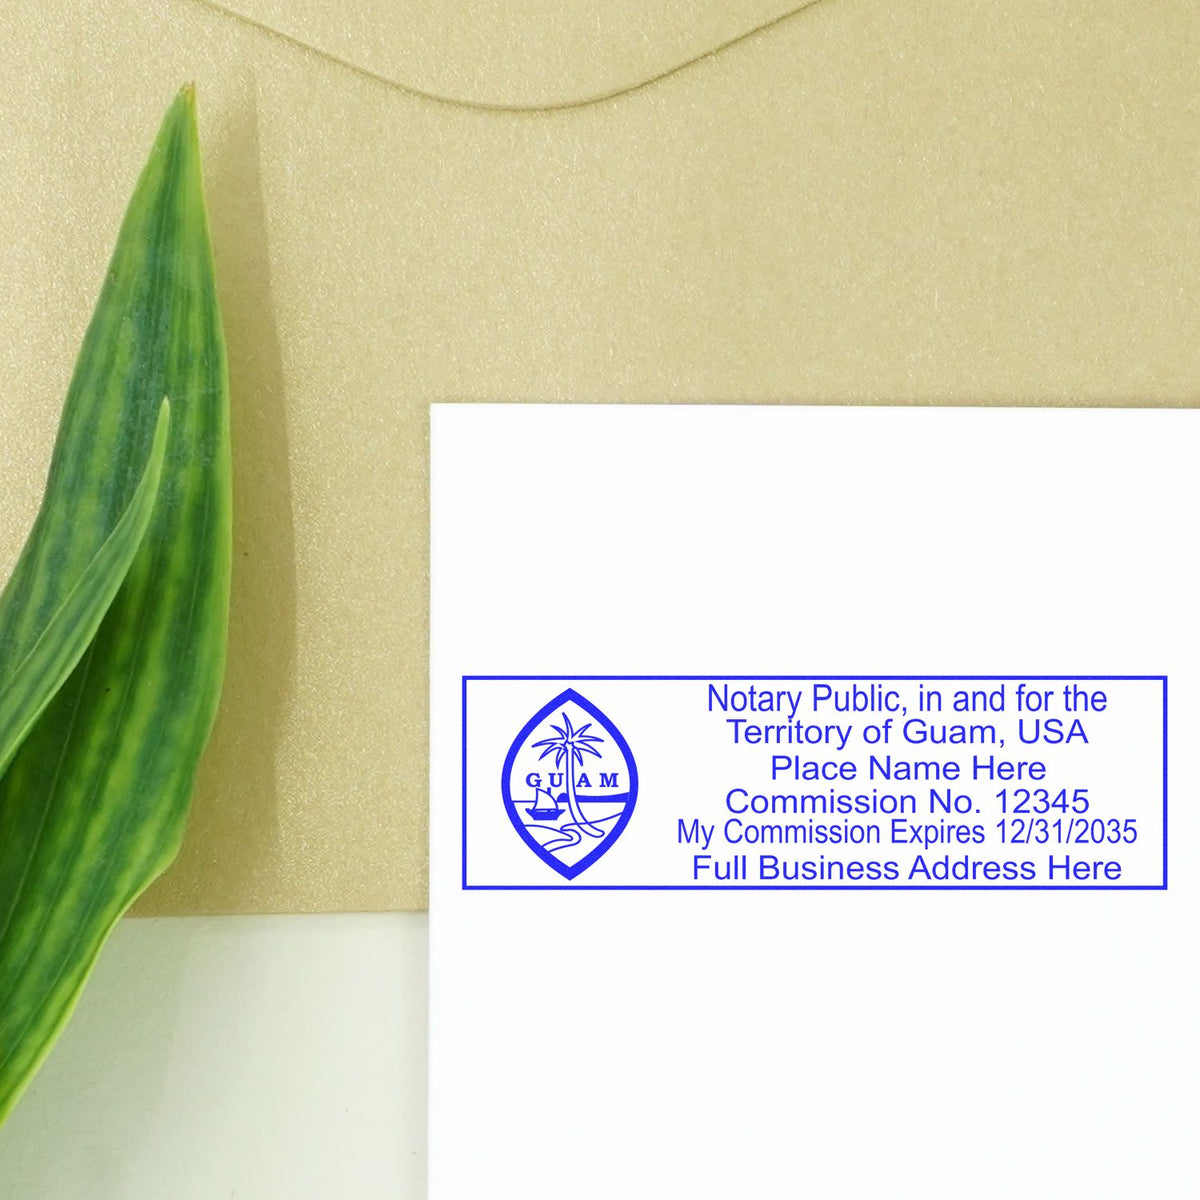 This paper is stamped with a sample imprint of the Wooden Handle Guam Rectangular Notary Public Stamp, signifying its quality and reliability.